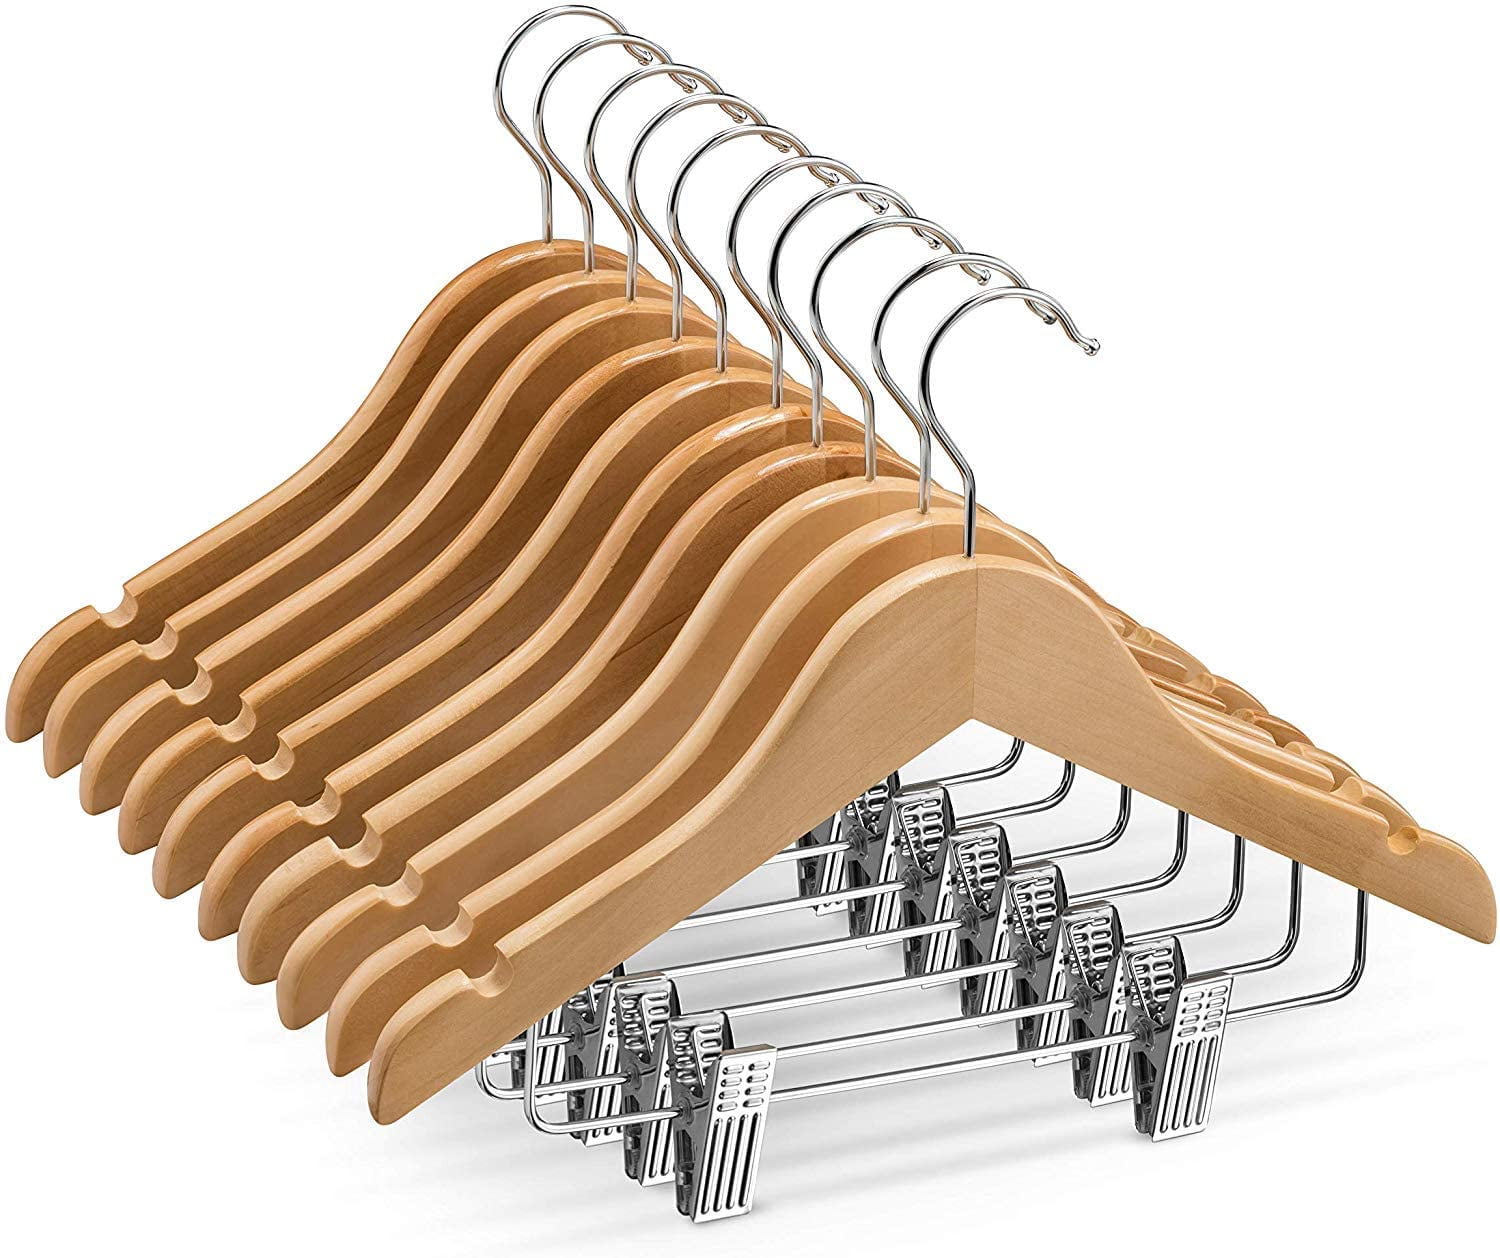 High-Grade Wooden Childrens-Kids Hangers With Clips 10Pk Smooth Wood Baby Hanger 